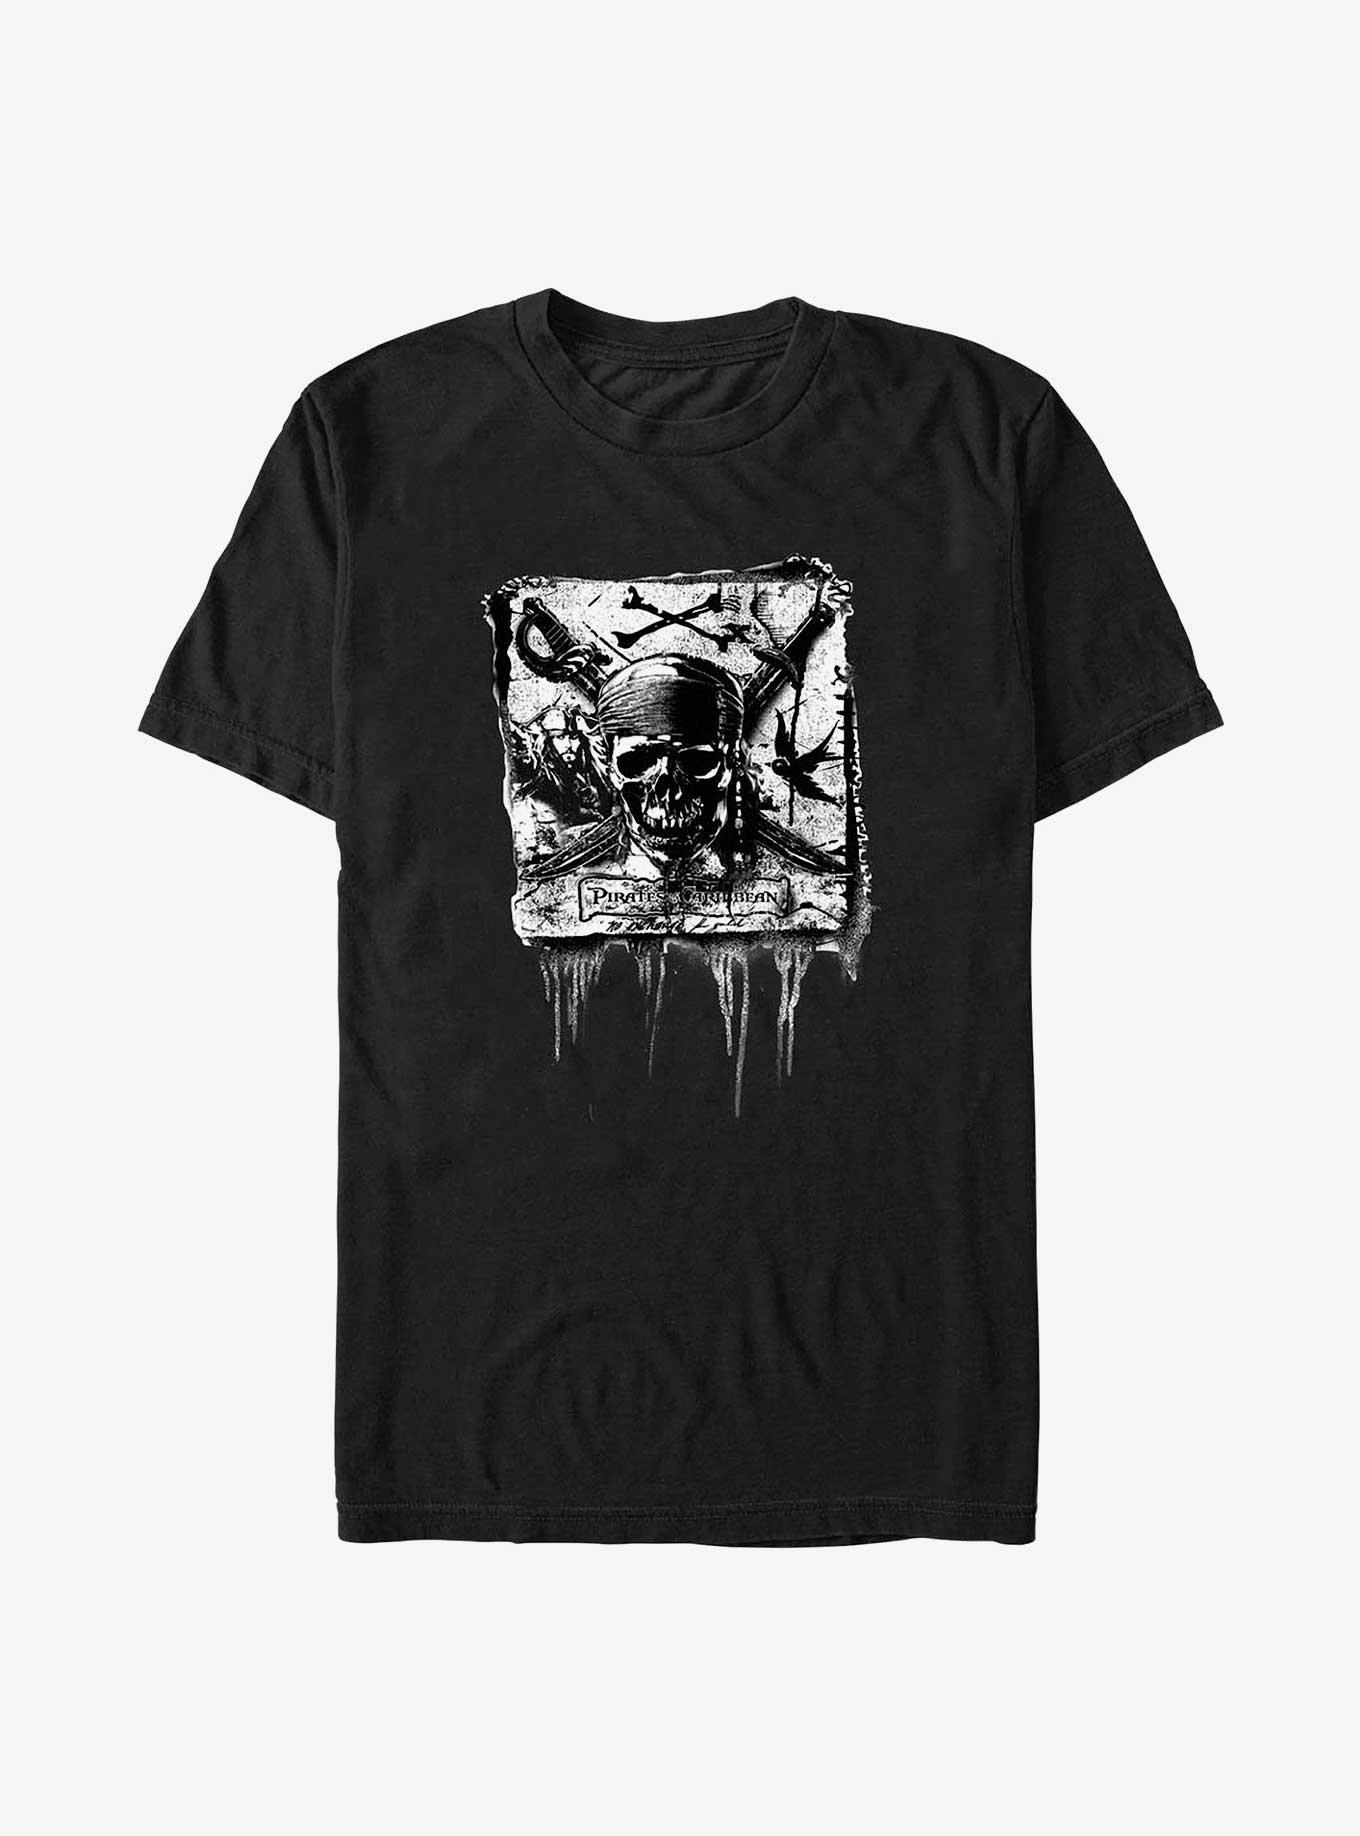 Pirates Of The Caribbean T-Shirts for Sale